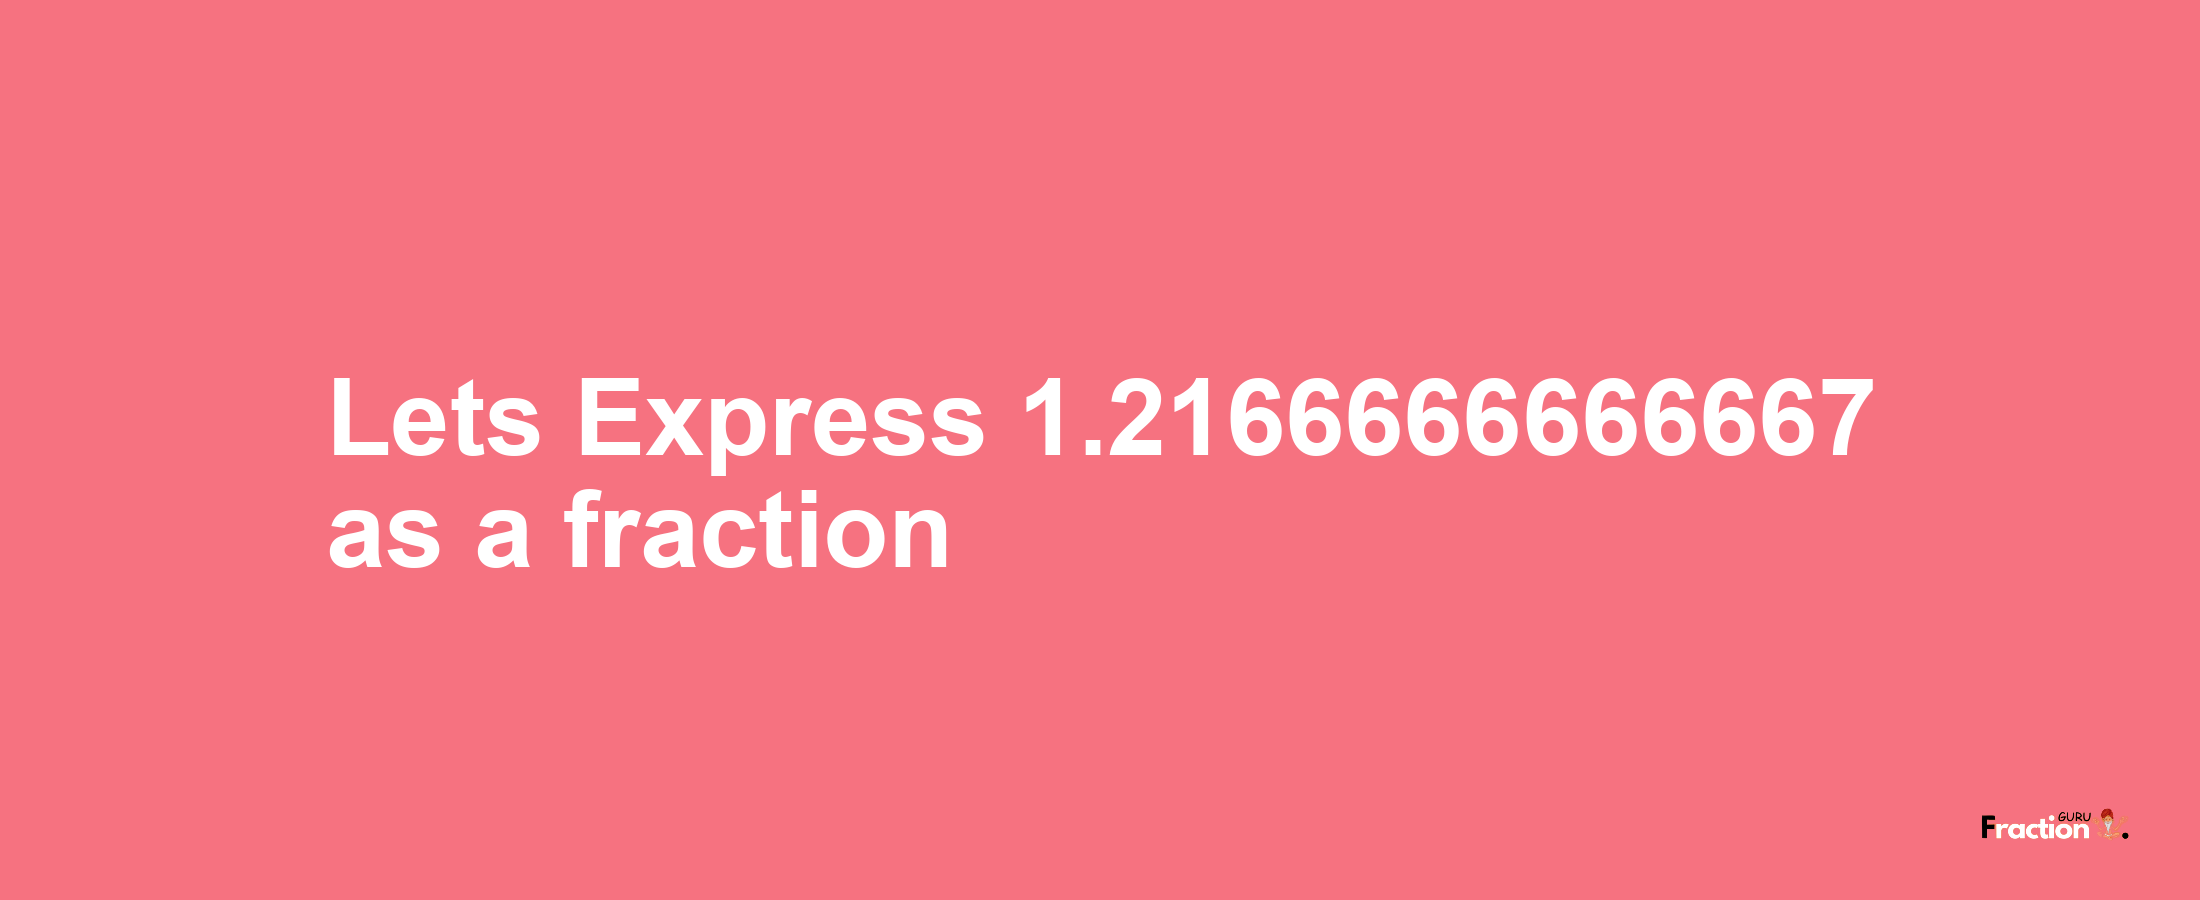 Lets Express 1.2166666666667 as afraction